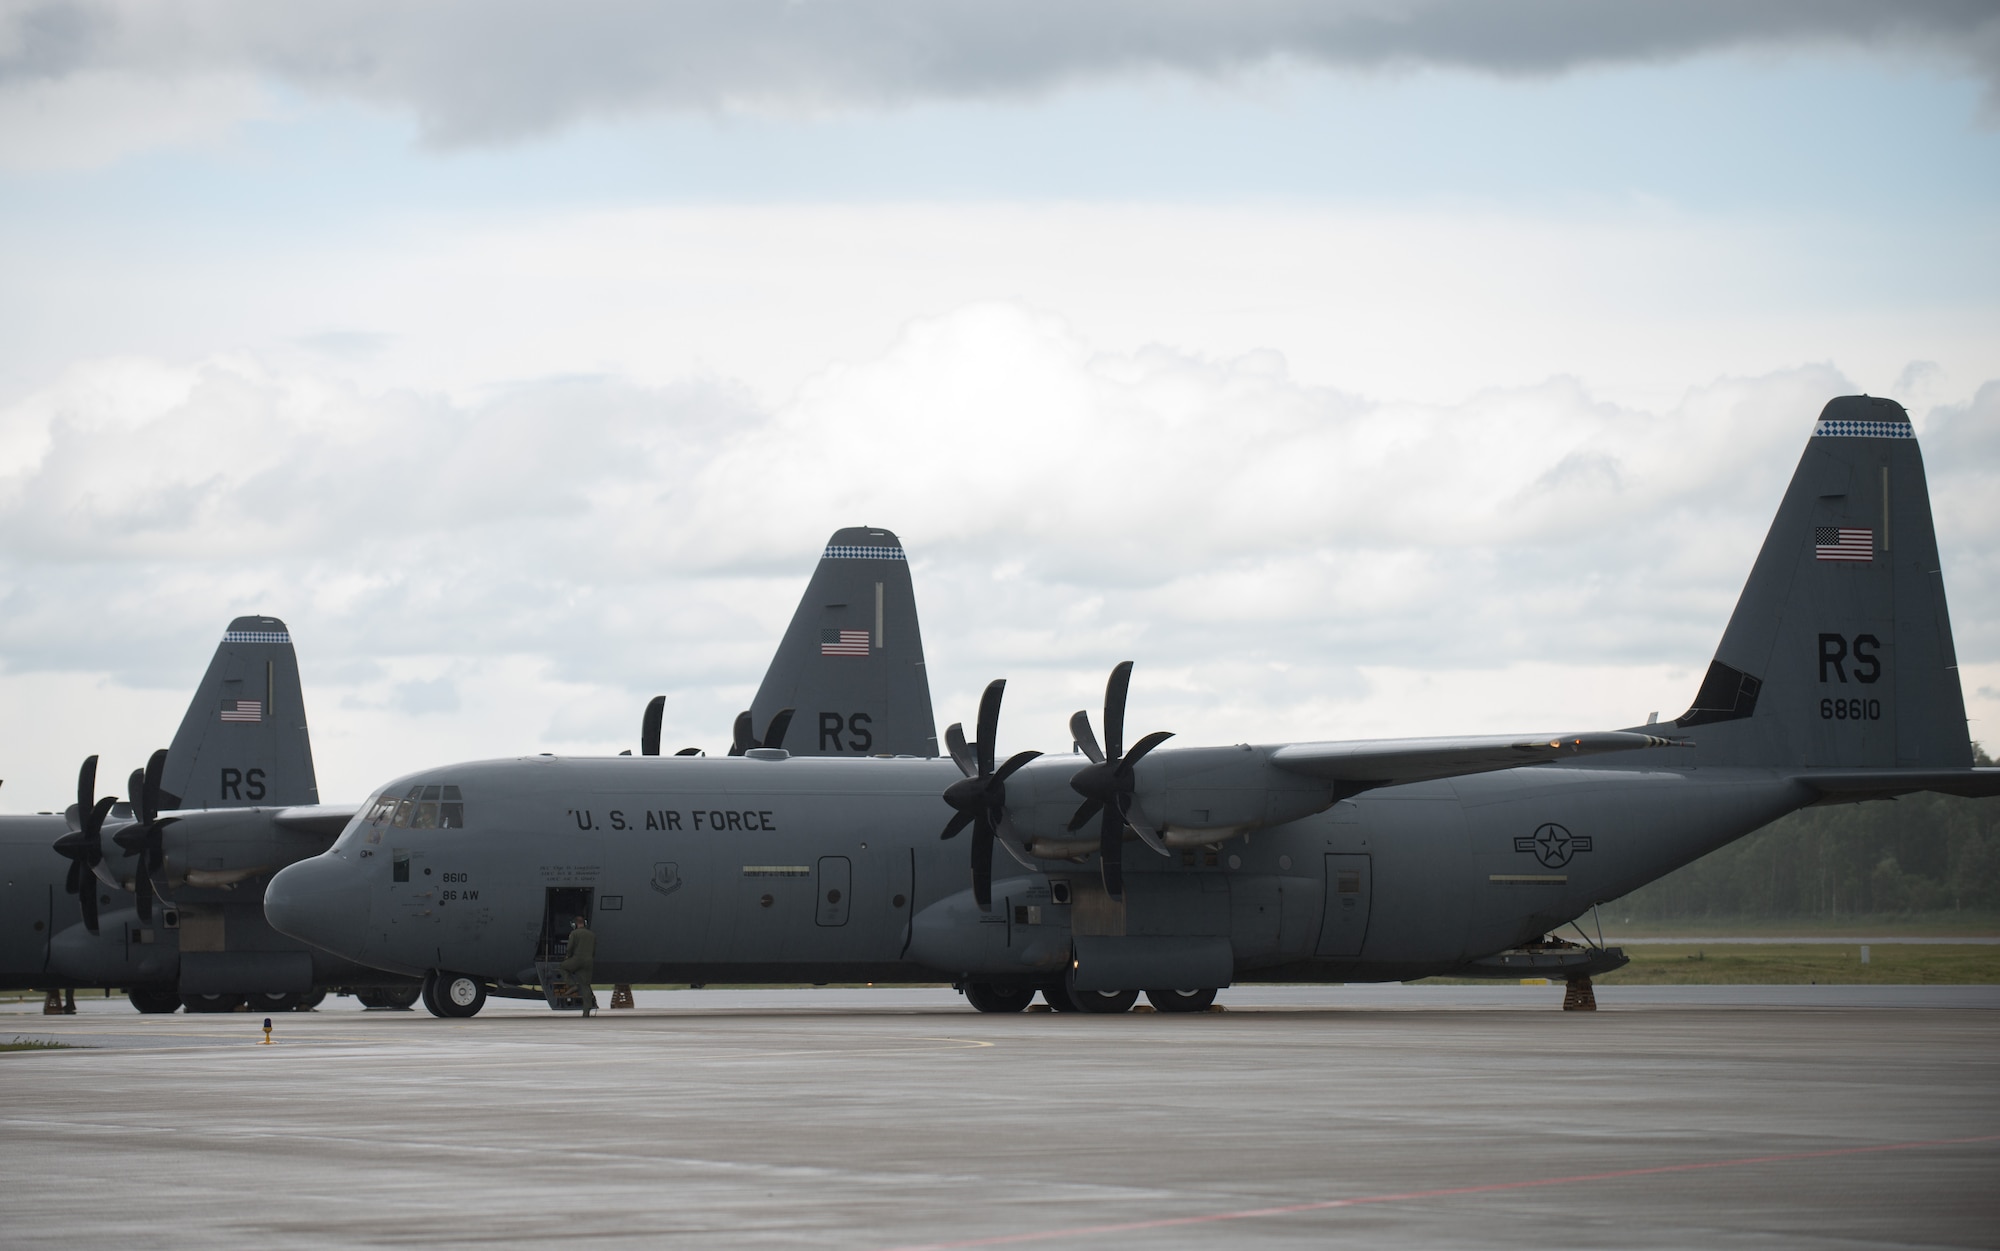 Three C-130 J-models are about to be unloaded at Lielvarde Air Base, Latvia, June 17, 2014 in part of the exercise Saber Strike 2014. In total, three 37th AS airframes landed on Lielvarde, making them the first ever U.S. Air Force aircraft to land on the runway. The 37th AS aircraft brought approximately 92 Airmen from the 435th Contingency Response Group and equipment needed to build a bare base during the Air Force-specific training. (U.S. Air Force photo/Senior Airman Jonathan Stefanko)